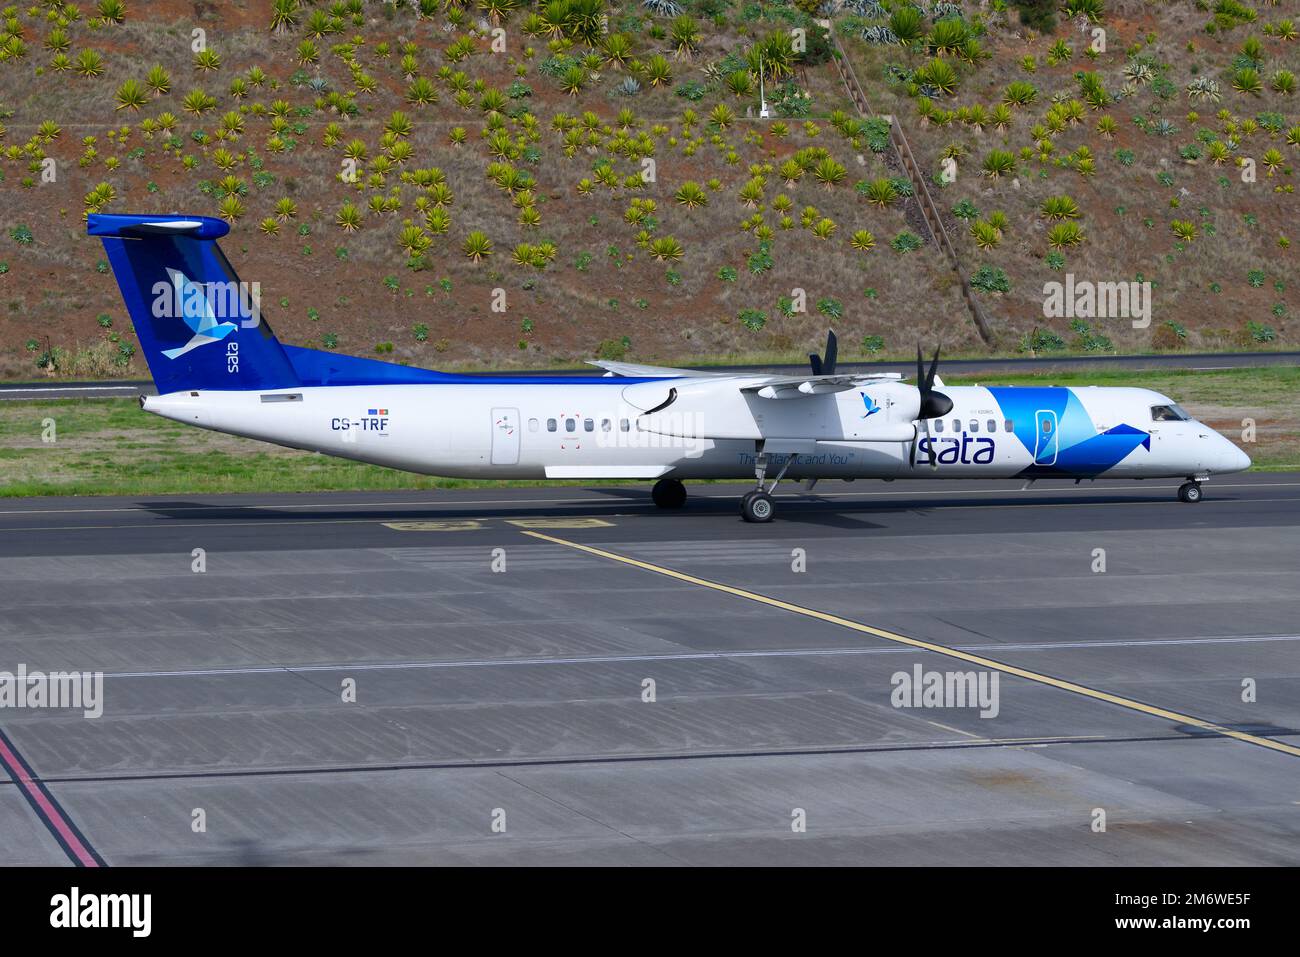 Azores Airlines De Havilland Dash 8 Q400 series aircraf taxiingt. Airplane DHC-8 of Açores Airlines, previously know as SATA Air Acores. Stock Photo